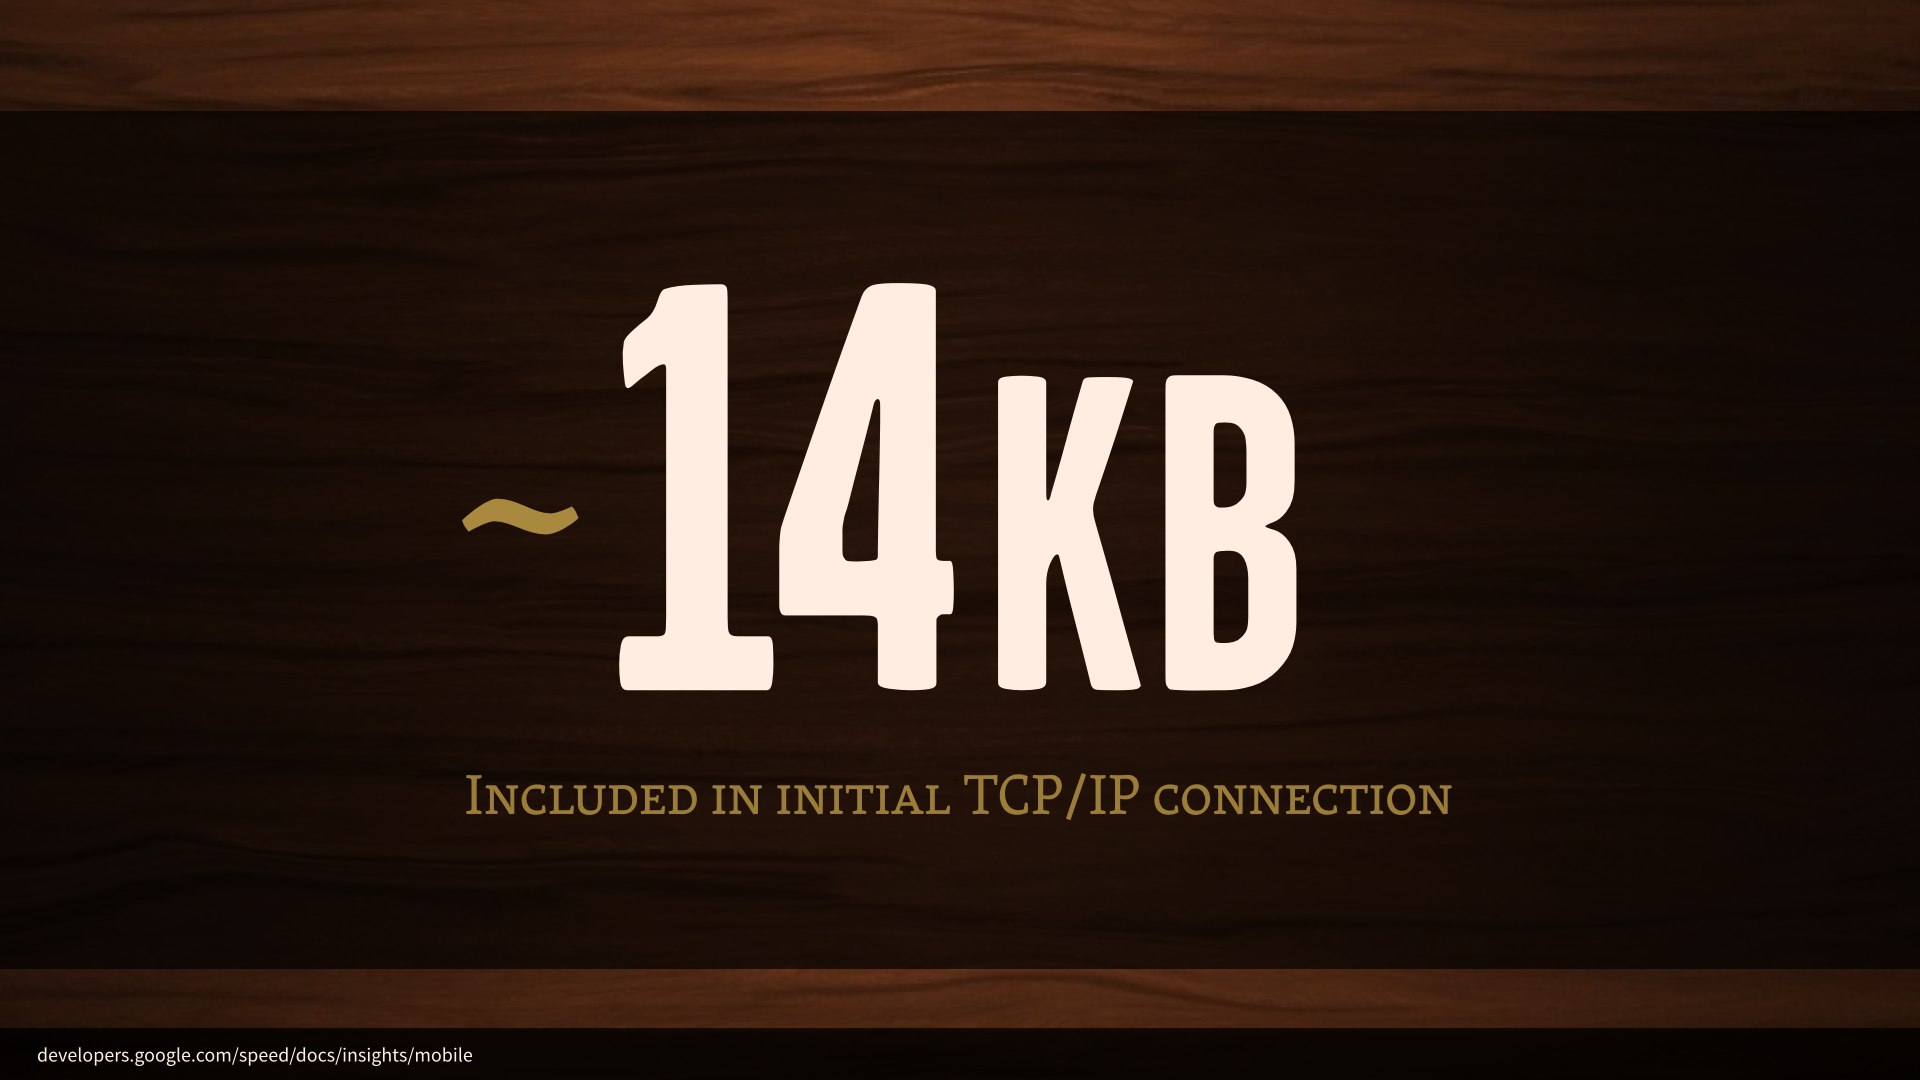 About 14 kilobytes included in initial TCP/IP connection